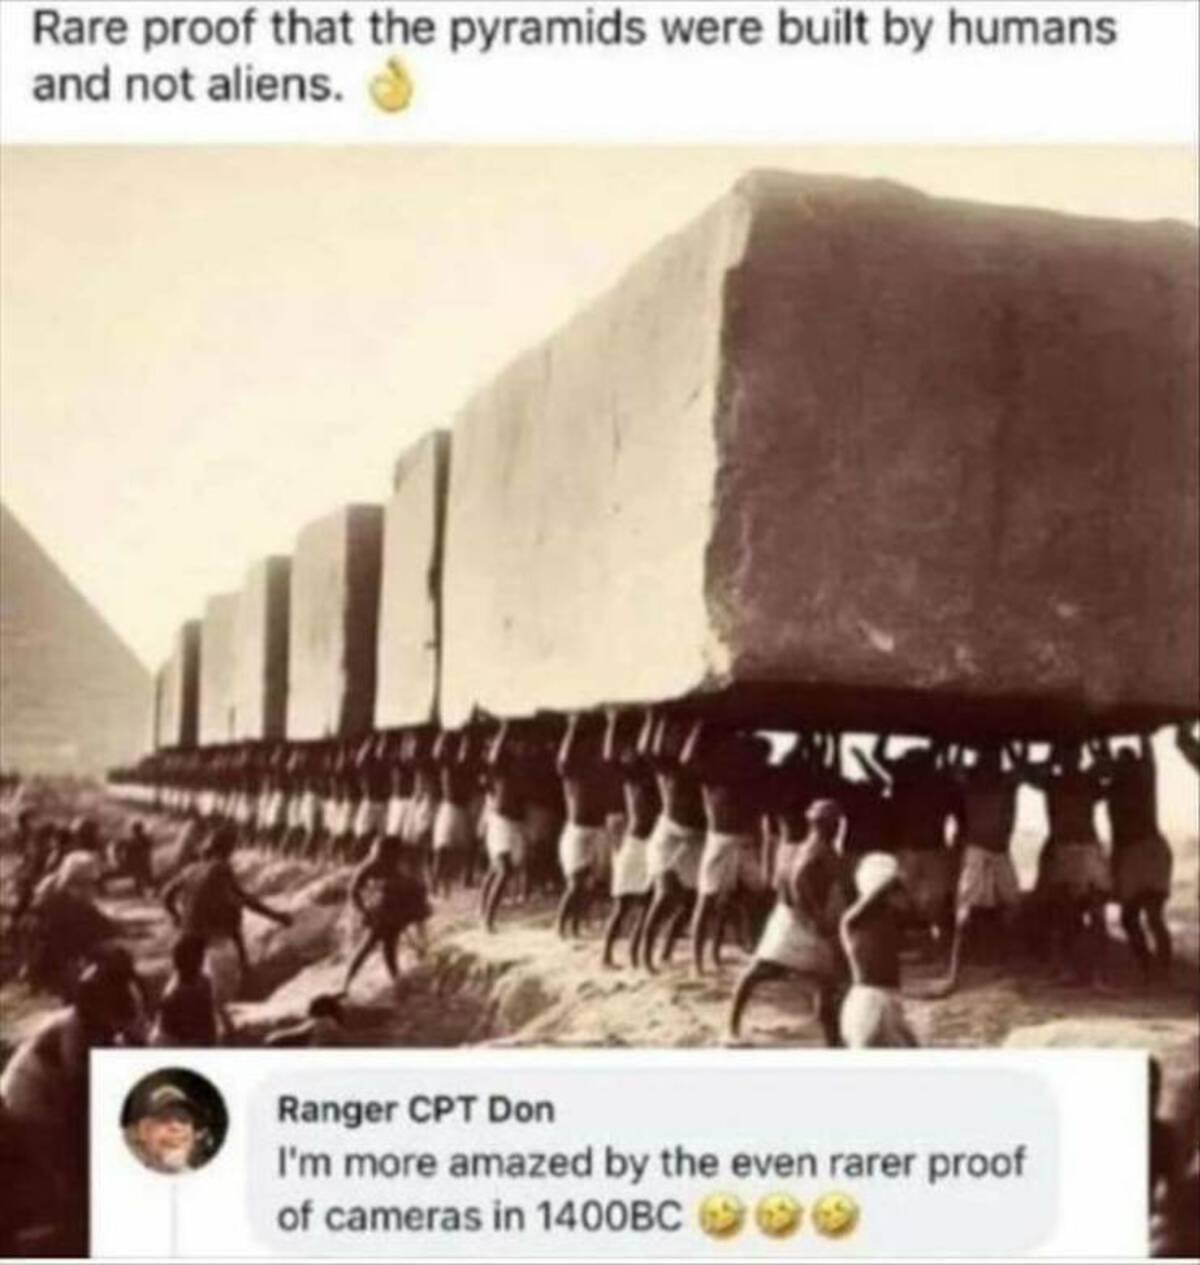 ancient egypt 12000 years old - Rare proof that the pyramids were built by humans and not aliens. Ranger Cpt Don I'm more amazed by the even rarer proof of cameras in 1400BC